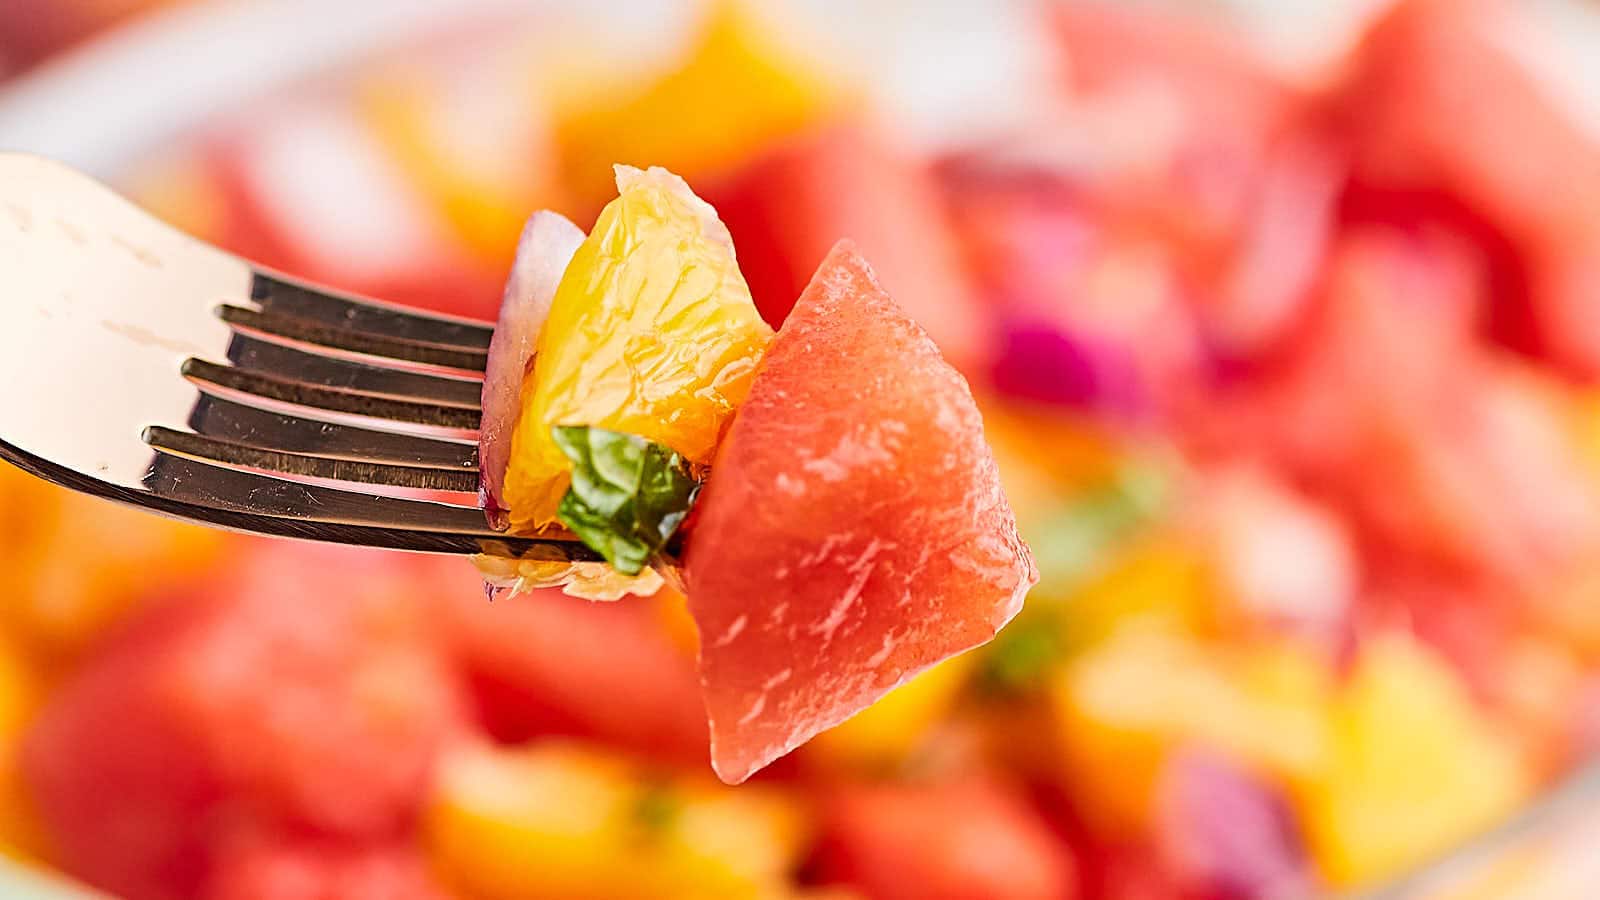 Watermelon and Orange Salad recipe by Cheerful Cook.